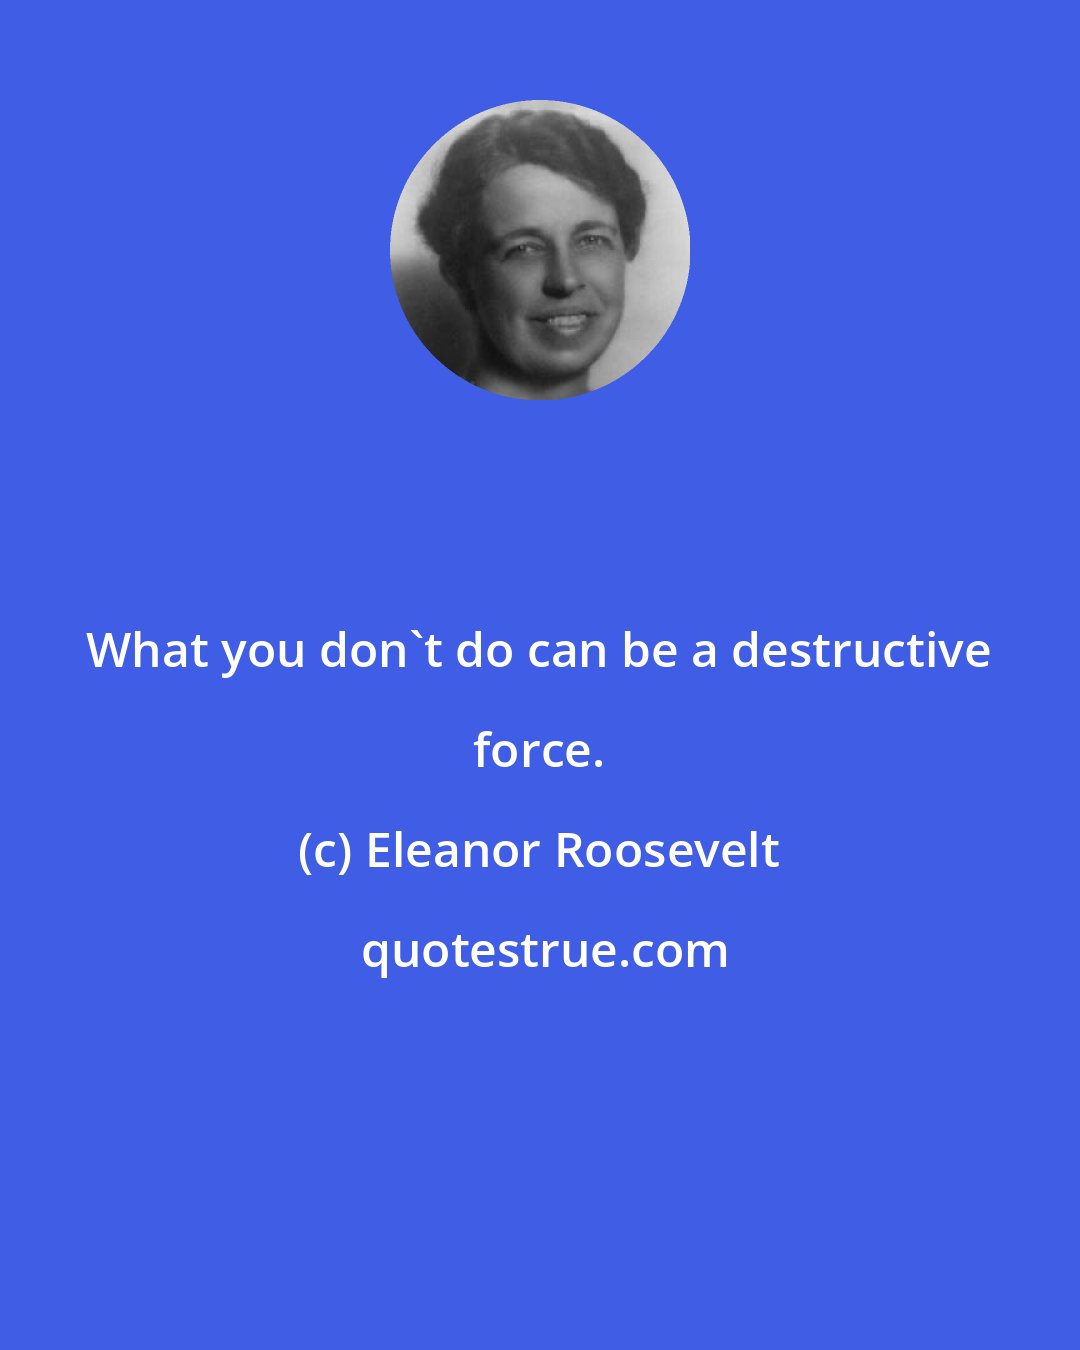 Eleanor Roosevelt: What you don't do can be a destructive force.